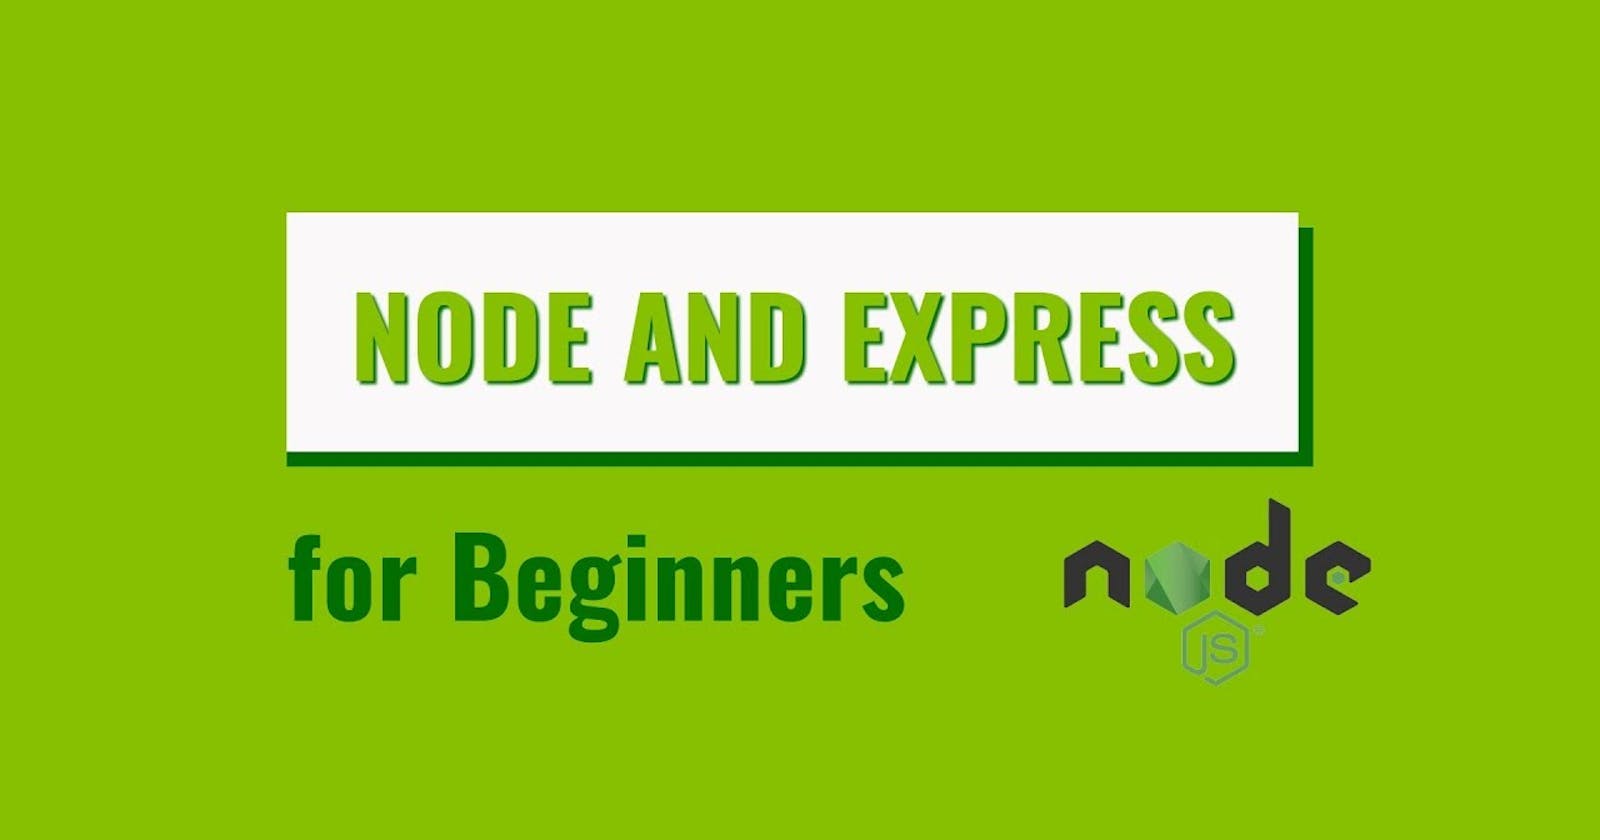 Node and Express for Beginners